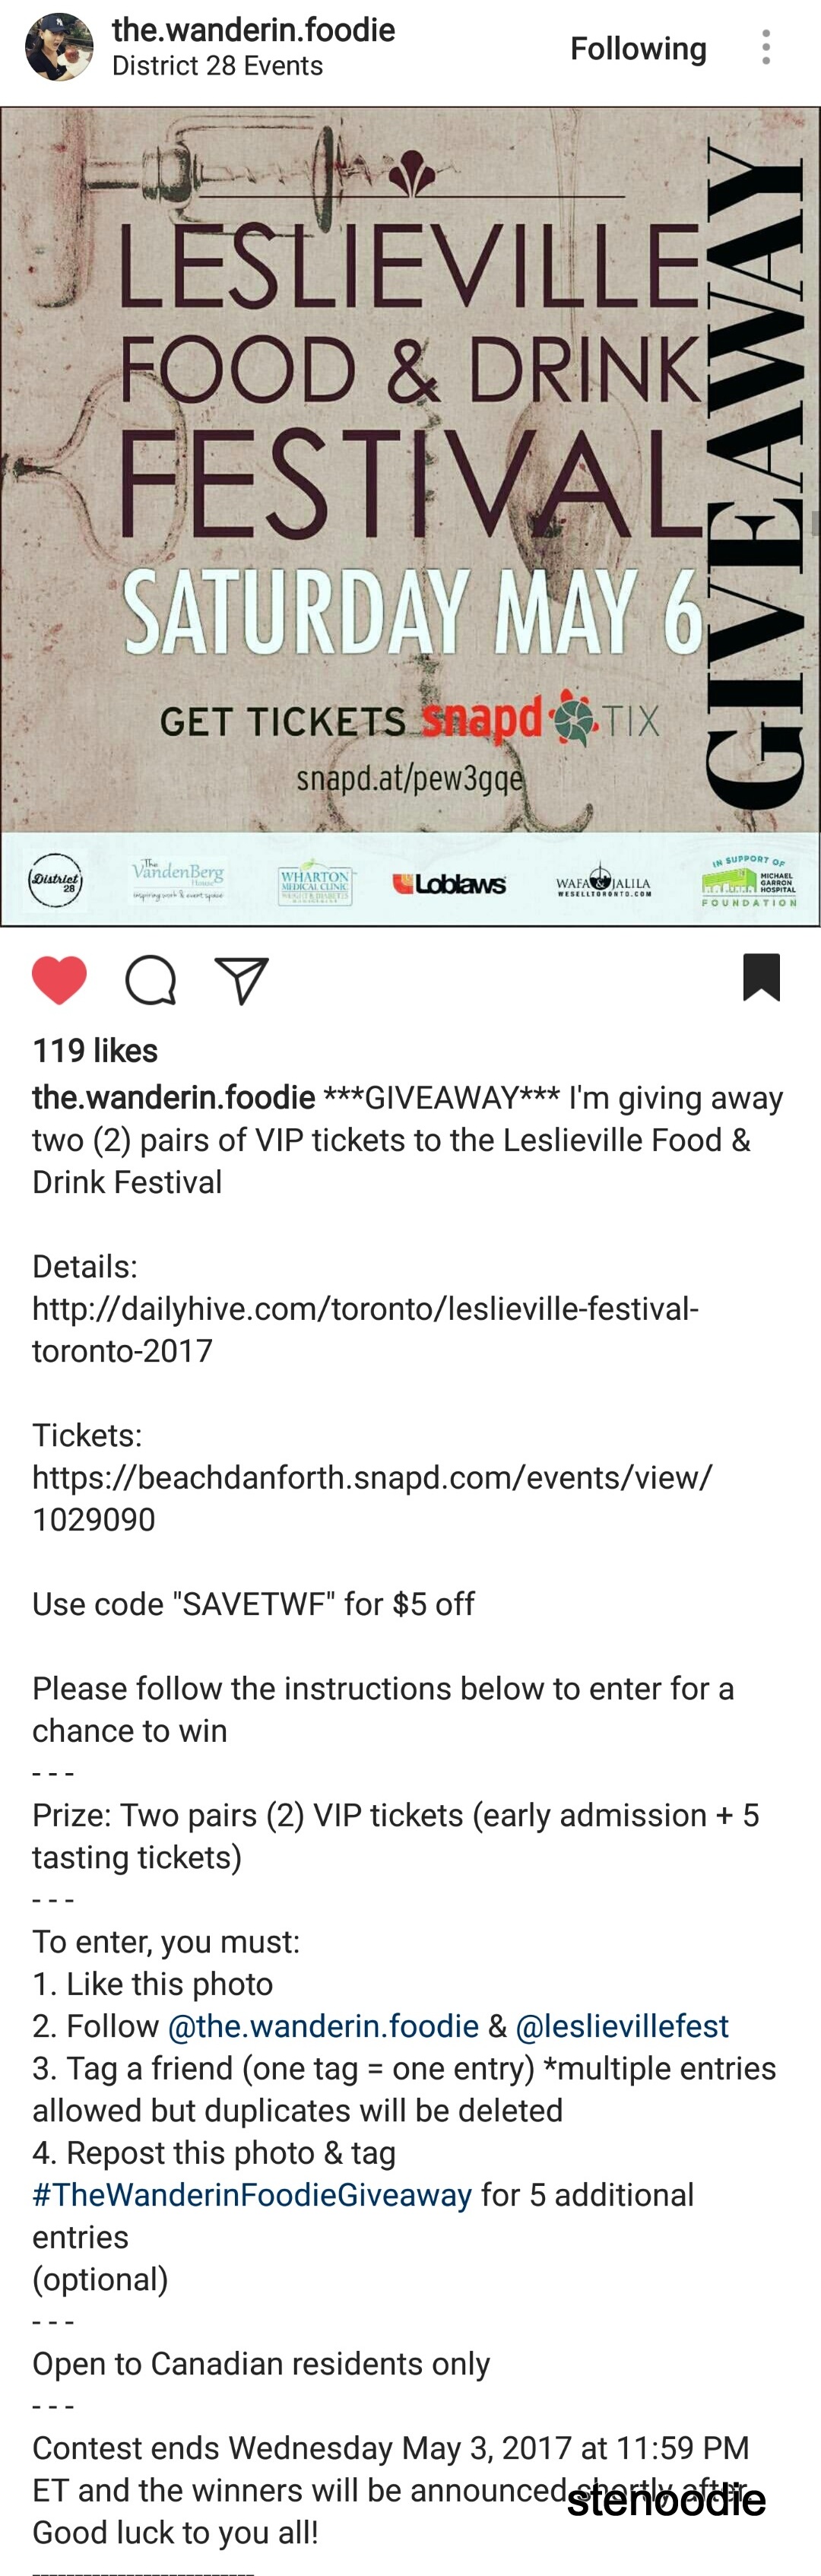 contest page screenshot 